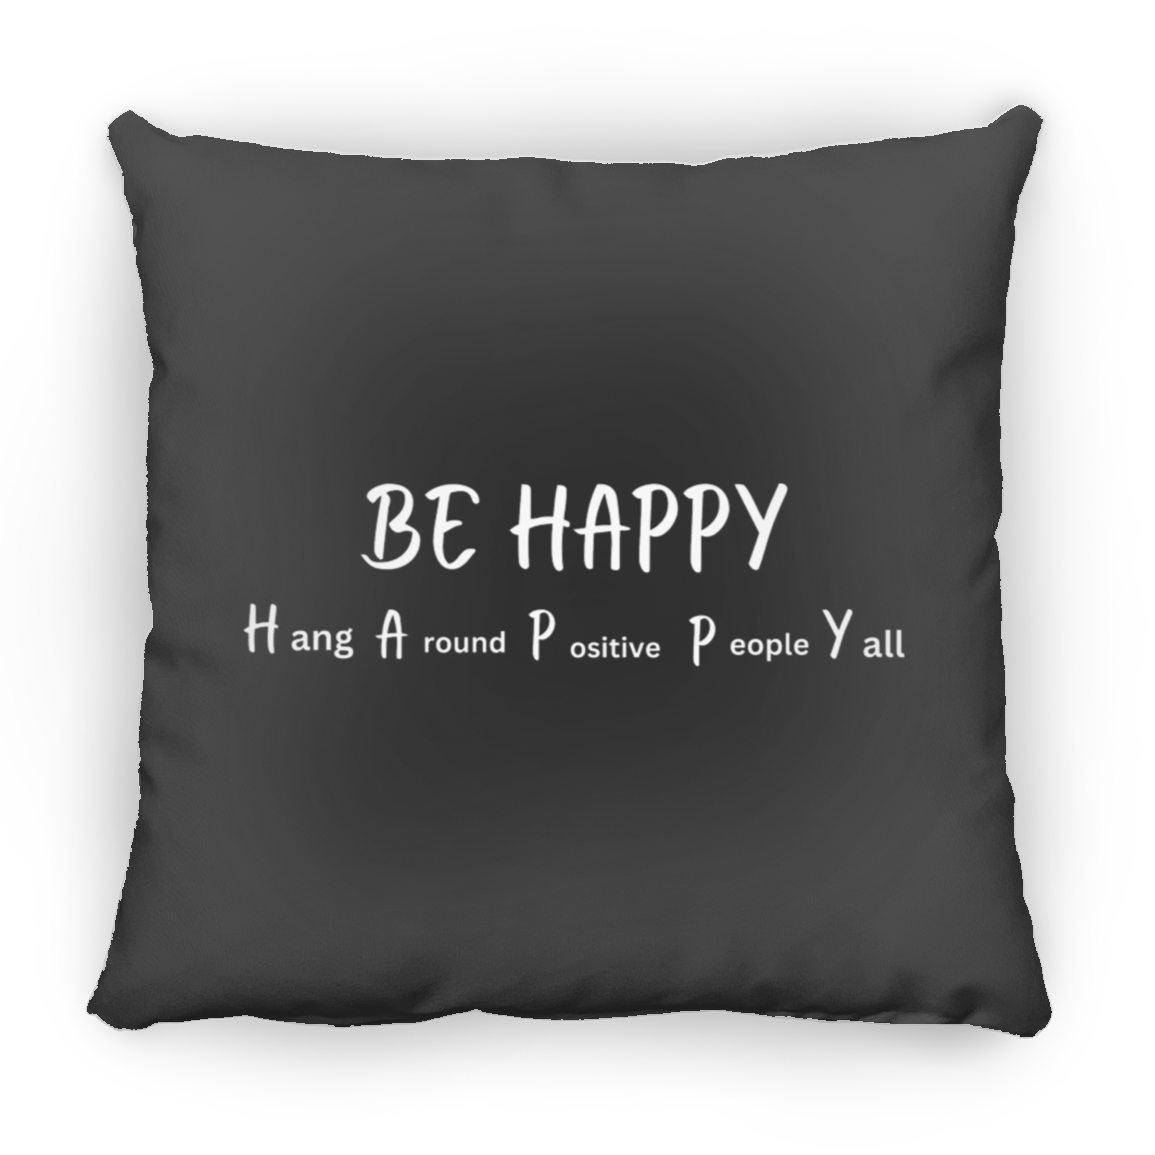 BE HAPPY Pillows